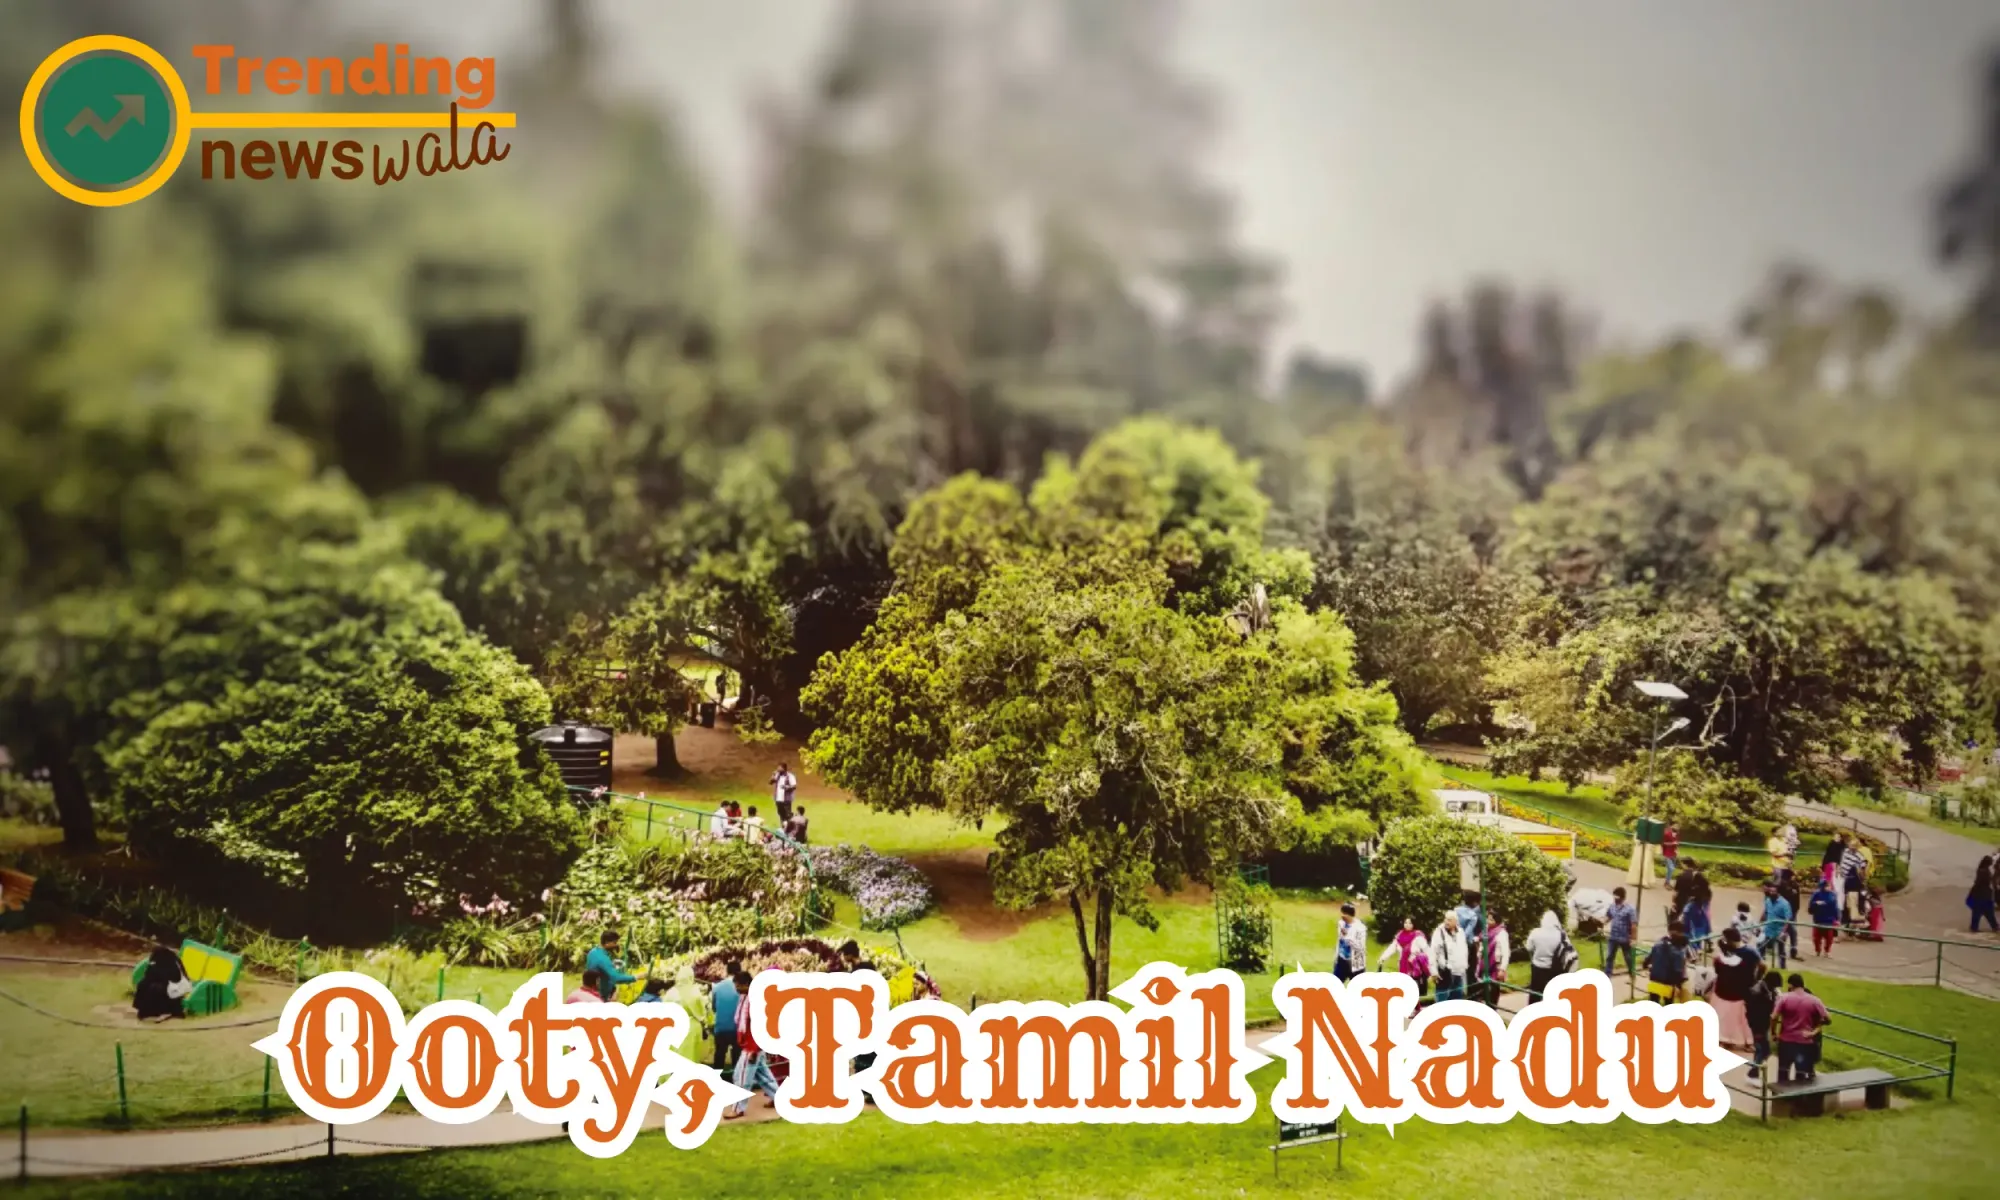 Ooty, officially known as Udhagamandalam, is a popular hill station located in the Nilgiri Hills